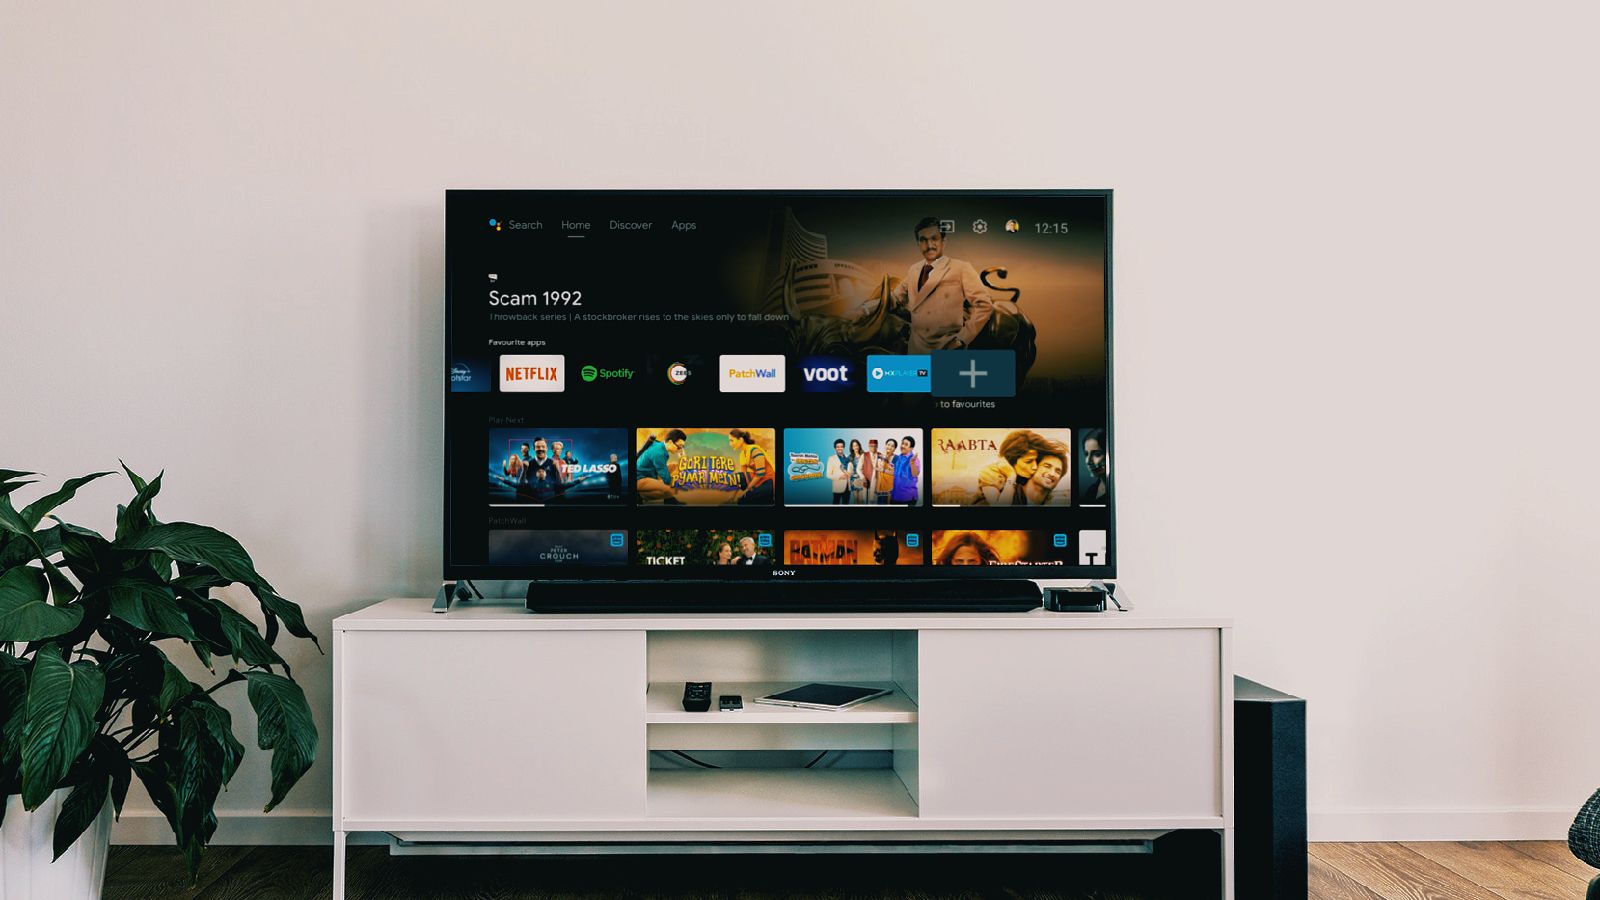 Android TV on a TV on a white cabinet against a white wall.